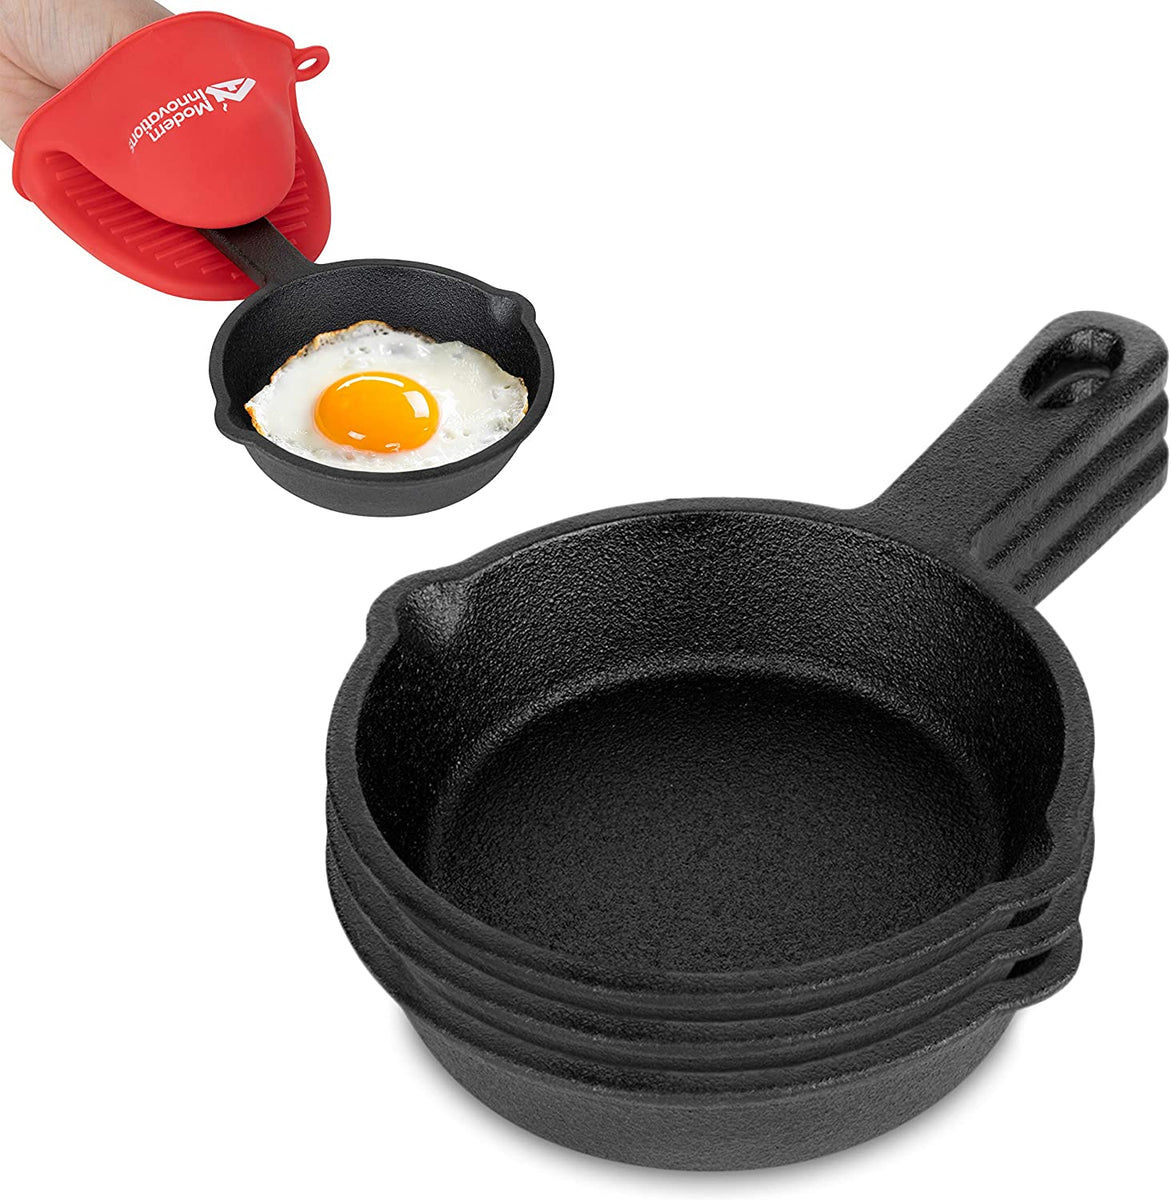 Kuha Mini Cast Iron Skillets 4” - 2-Pack of Pre-Seasoned Miniature Skillets - with 2 Small Silicone Trivets and Cast Iron Scraper